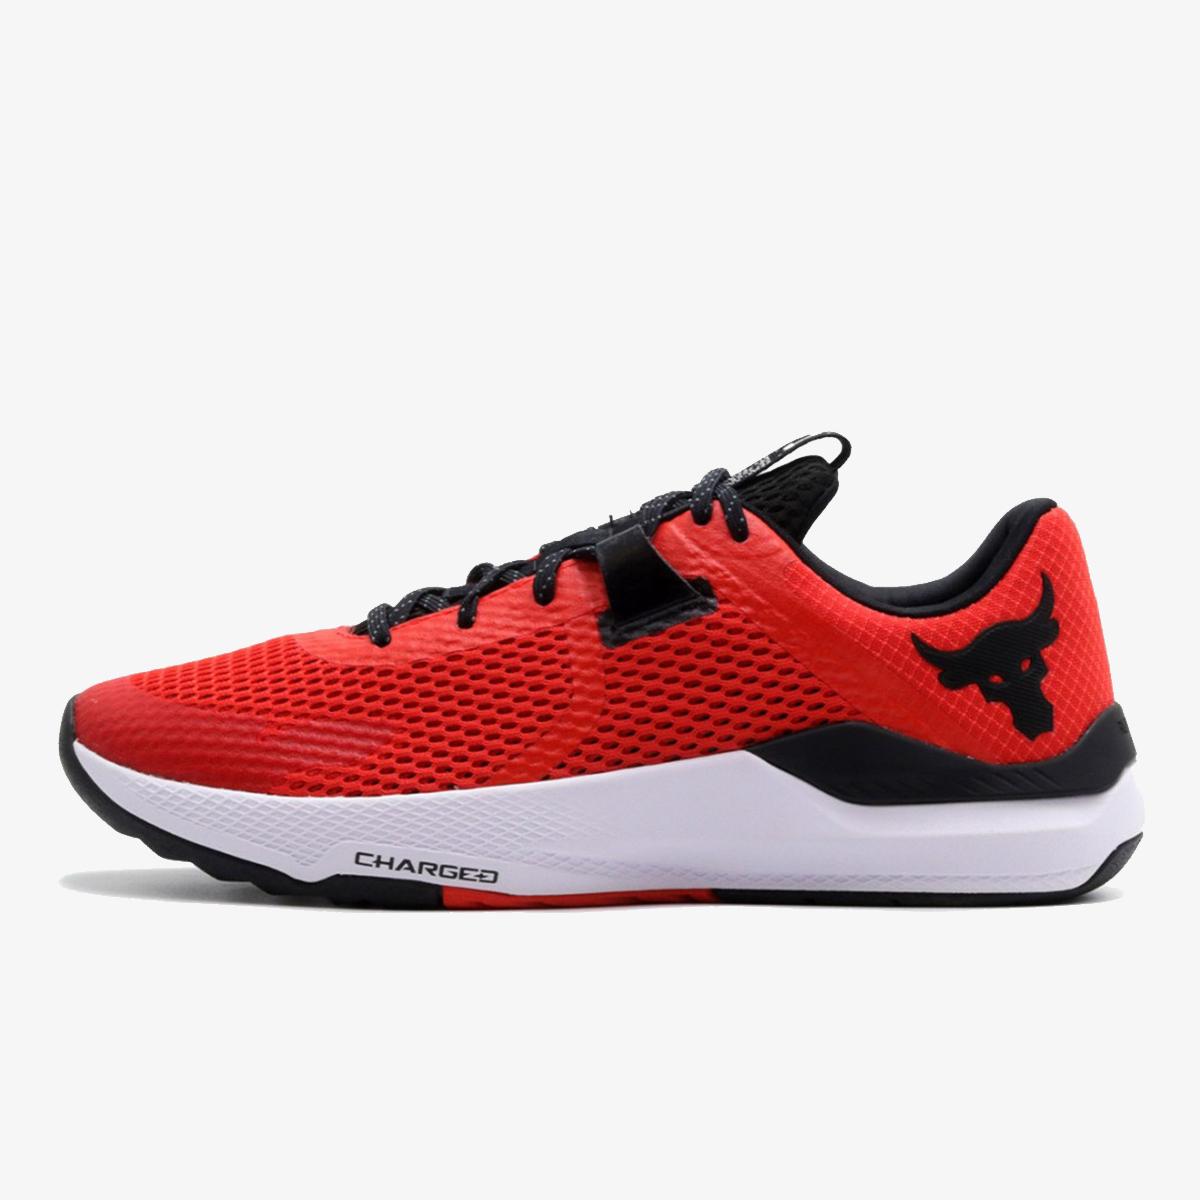 UNDER ARMOUR UA PROJECT ROCK BSR 2 